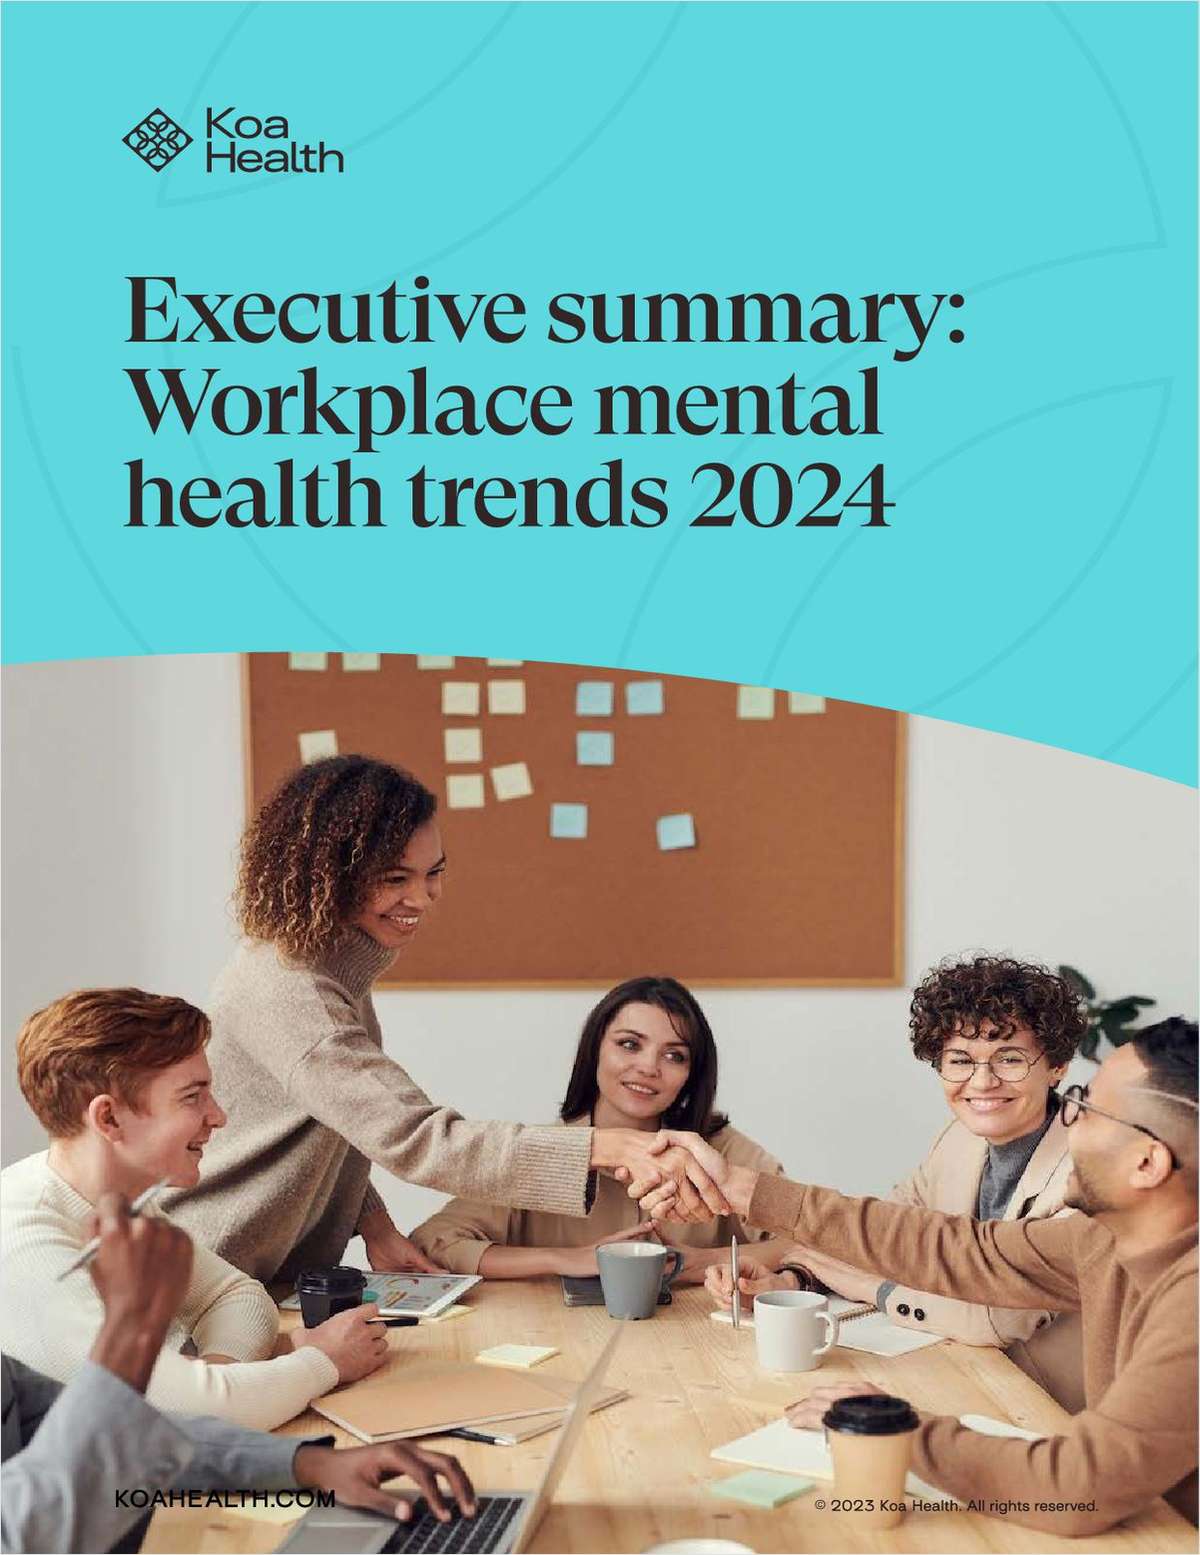 Workplace Mental Health Trends in 2024 link